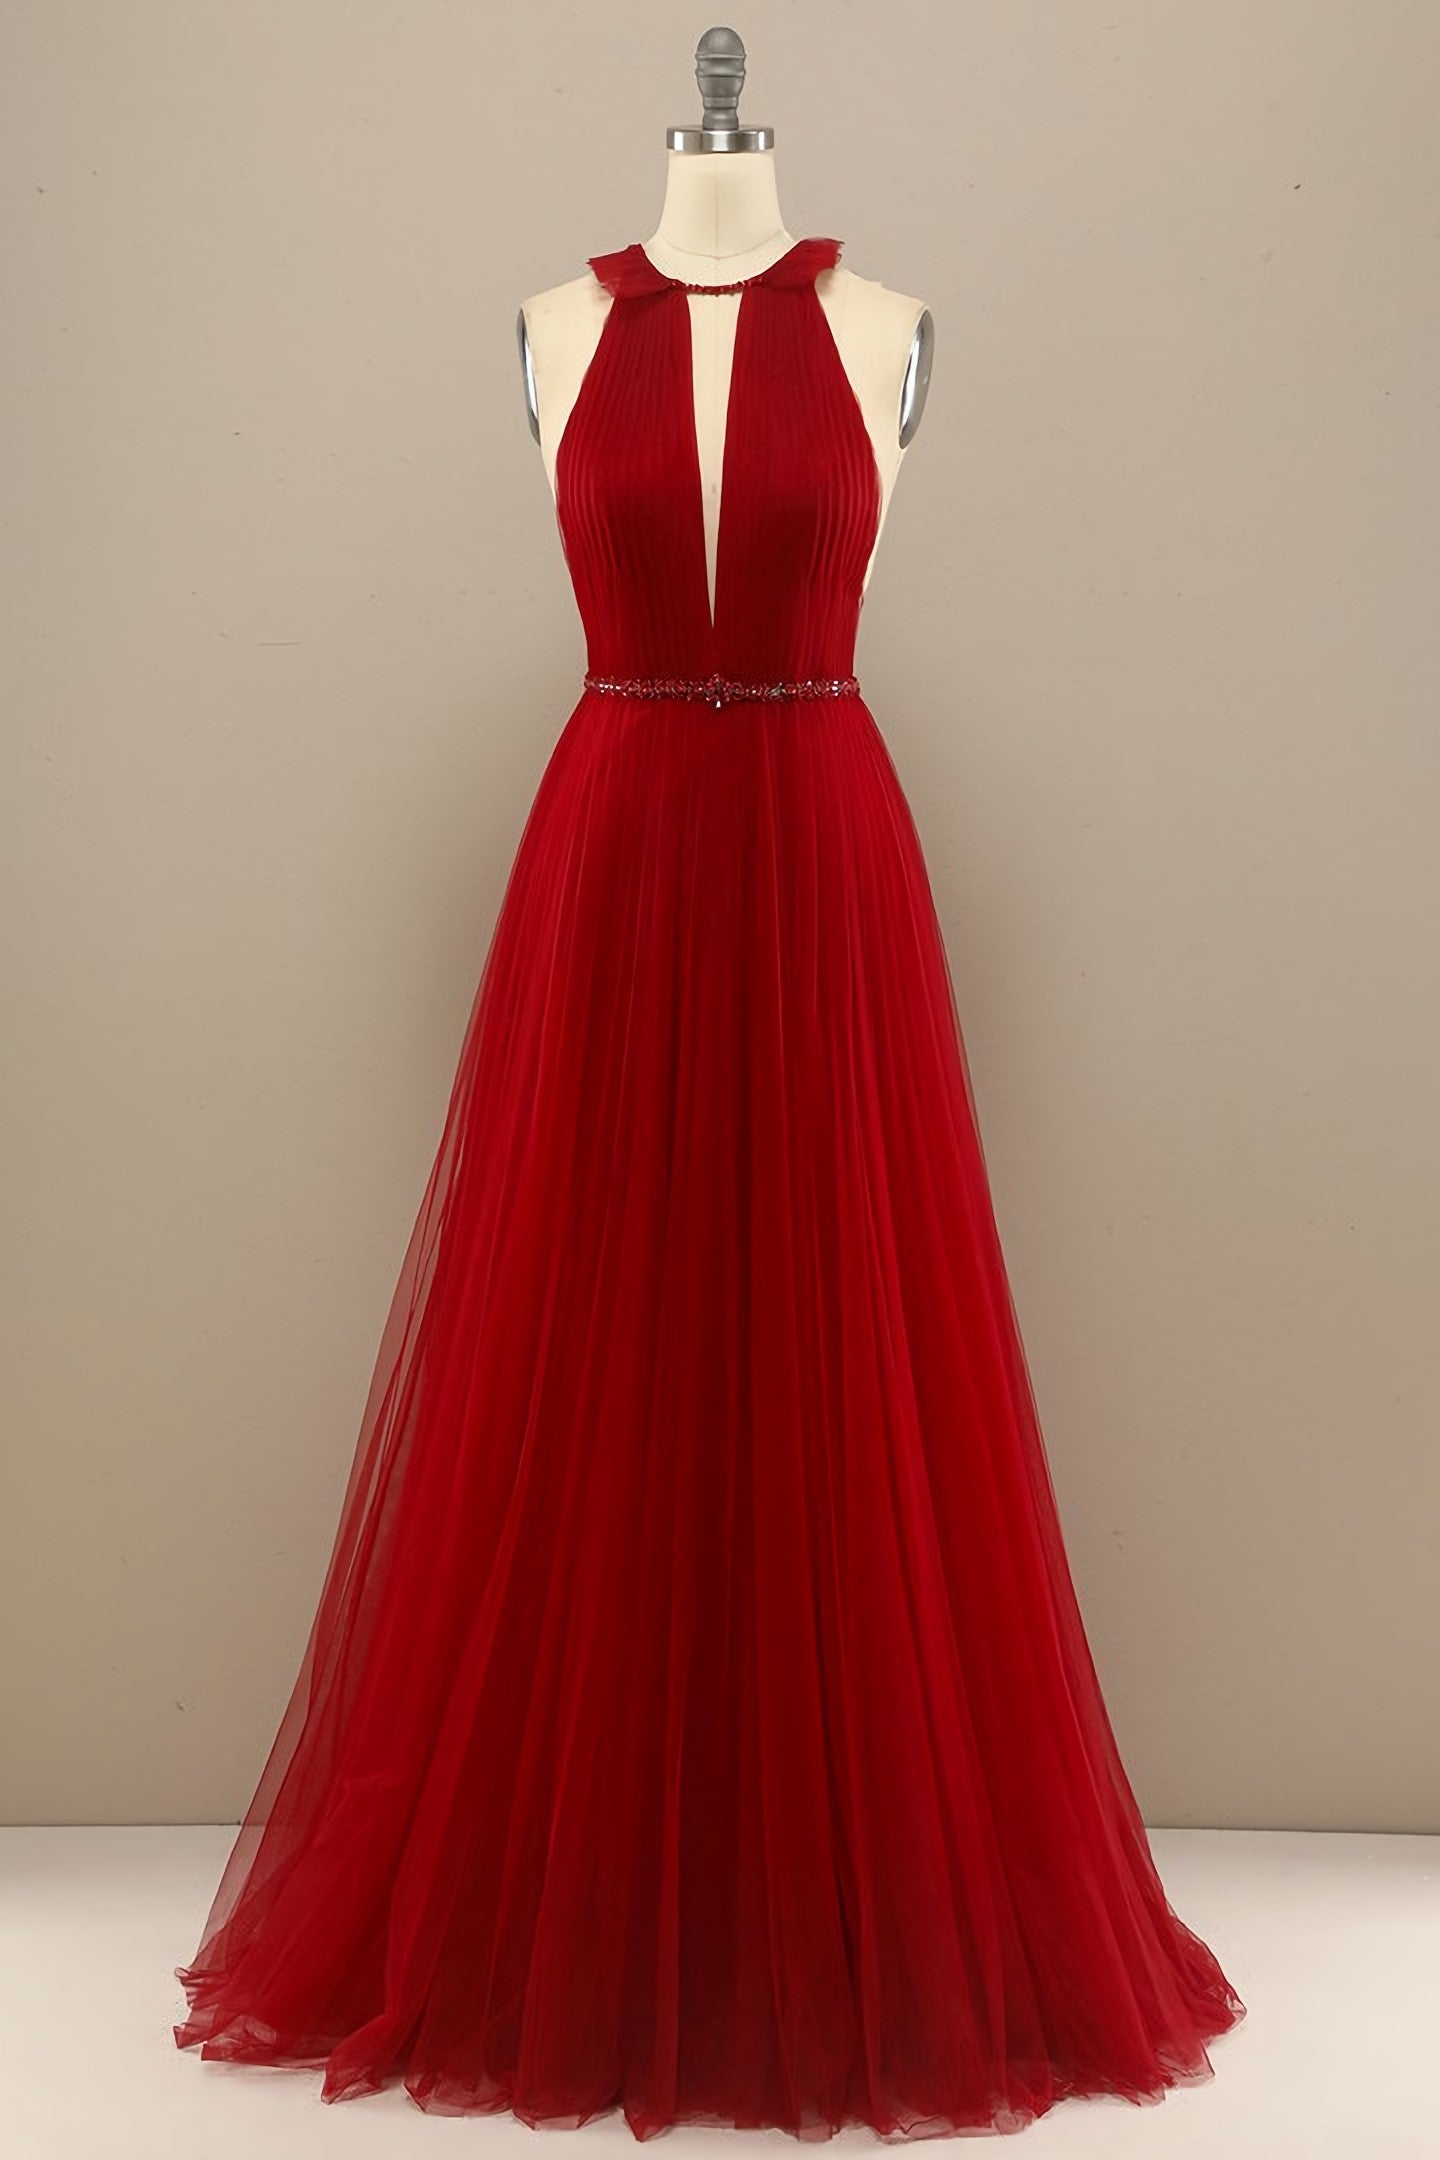 Prom Dresses For Short Girls, Red Pleated Long Chiffon Prom Dress